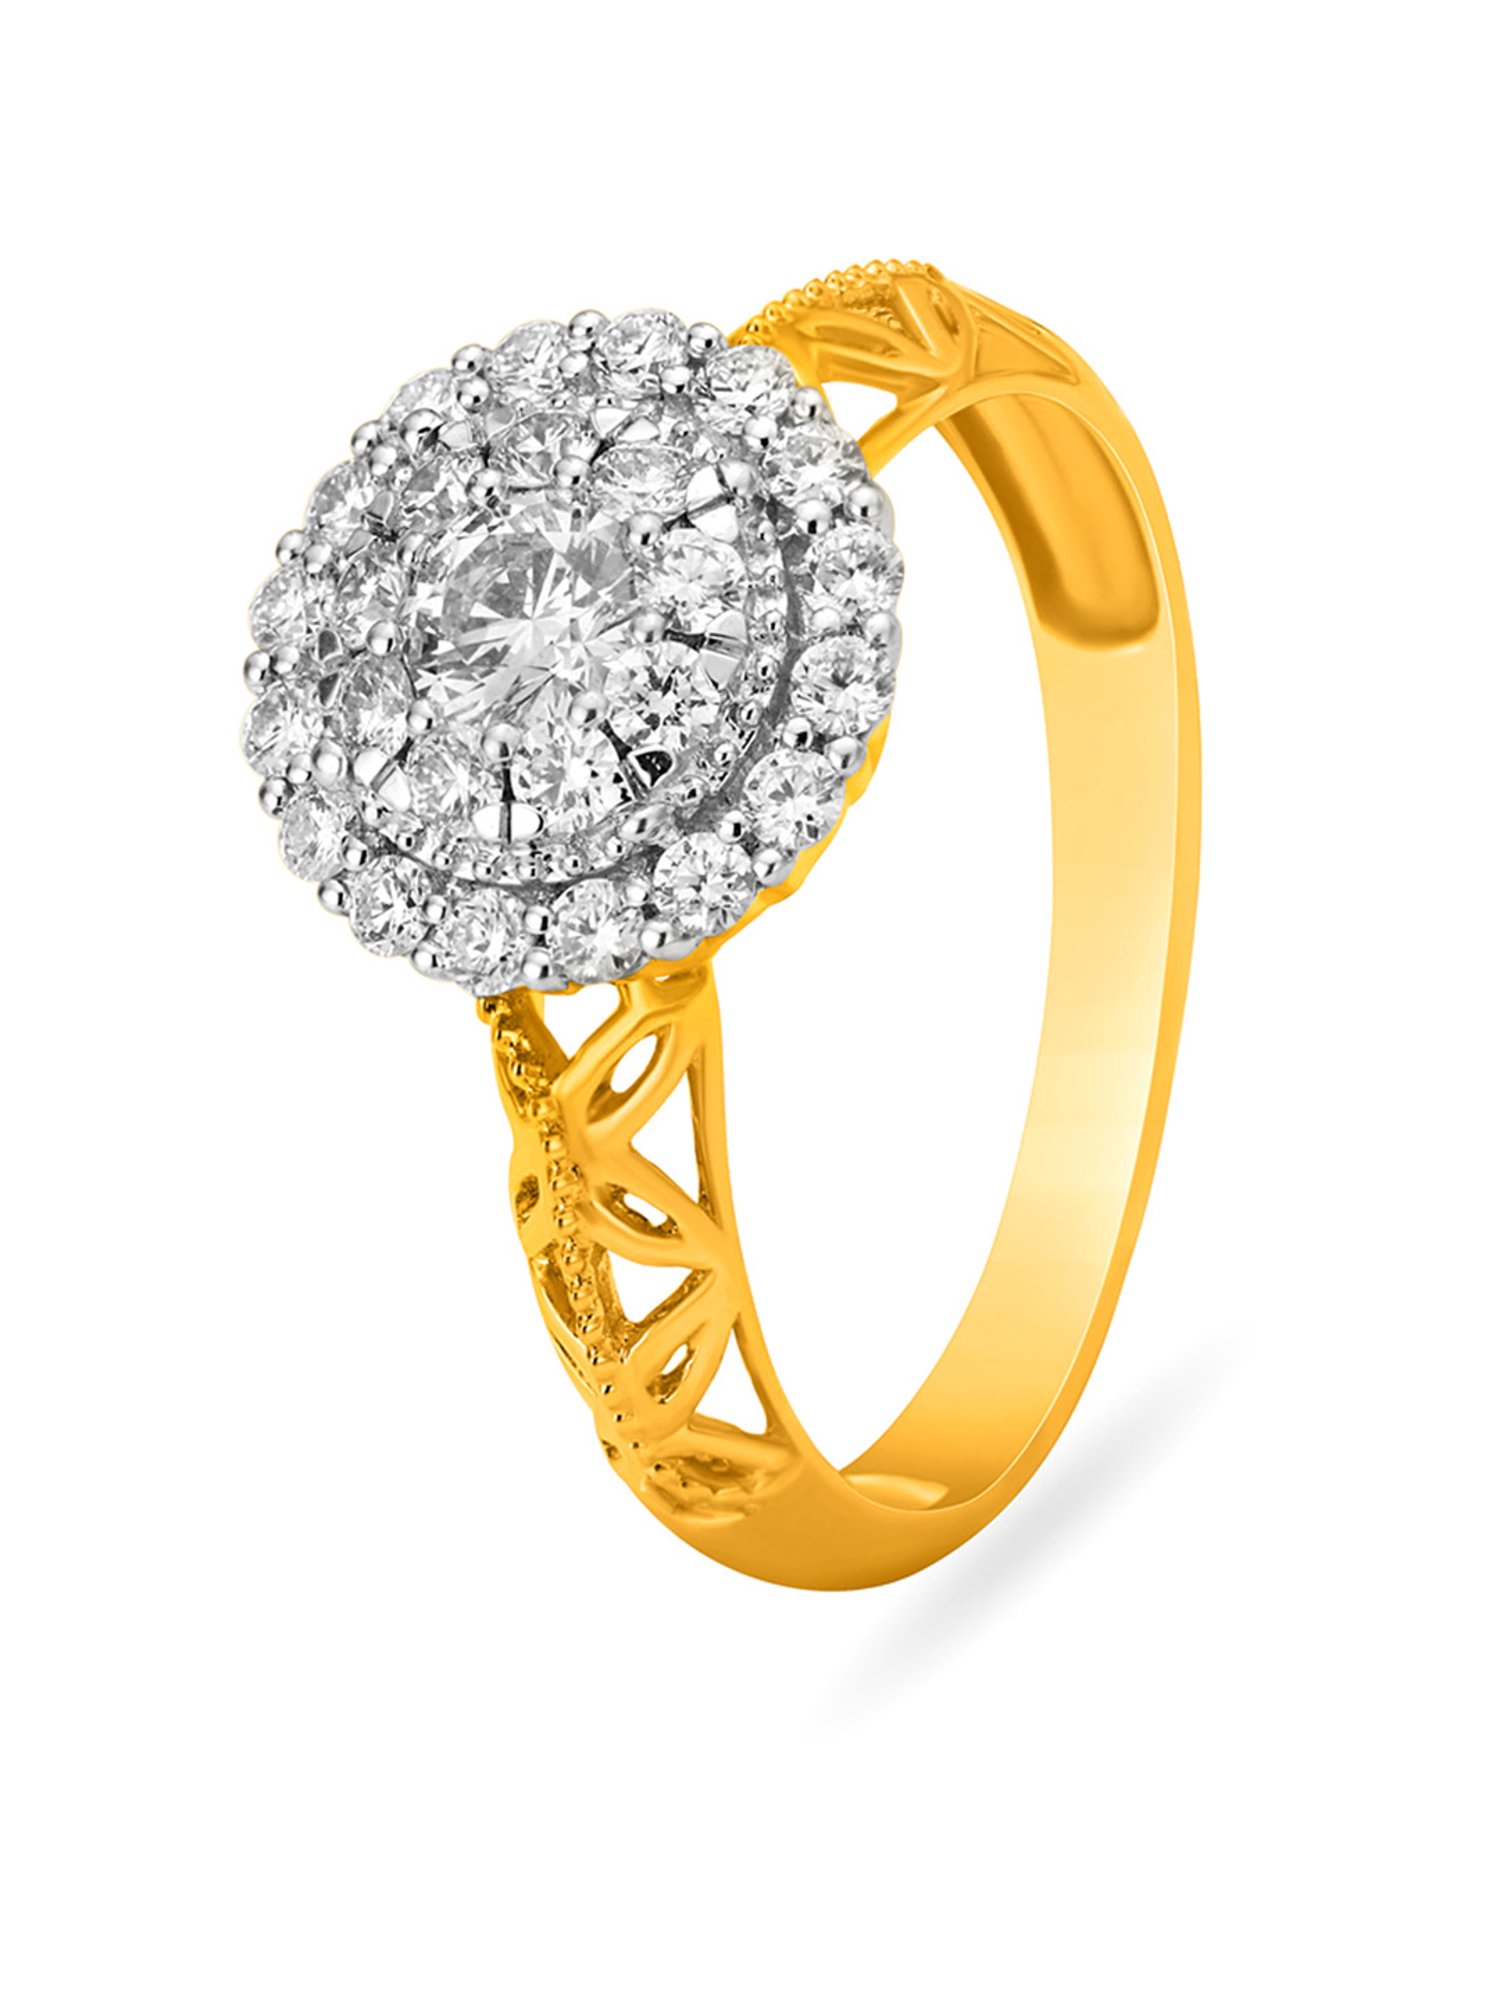 Tanishq Gold Finger Ring in Begusarai - Dealers, Manufacturers & Suppliers  - Justdial